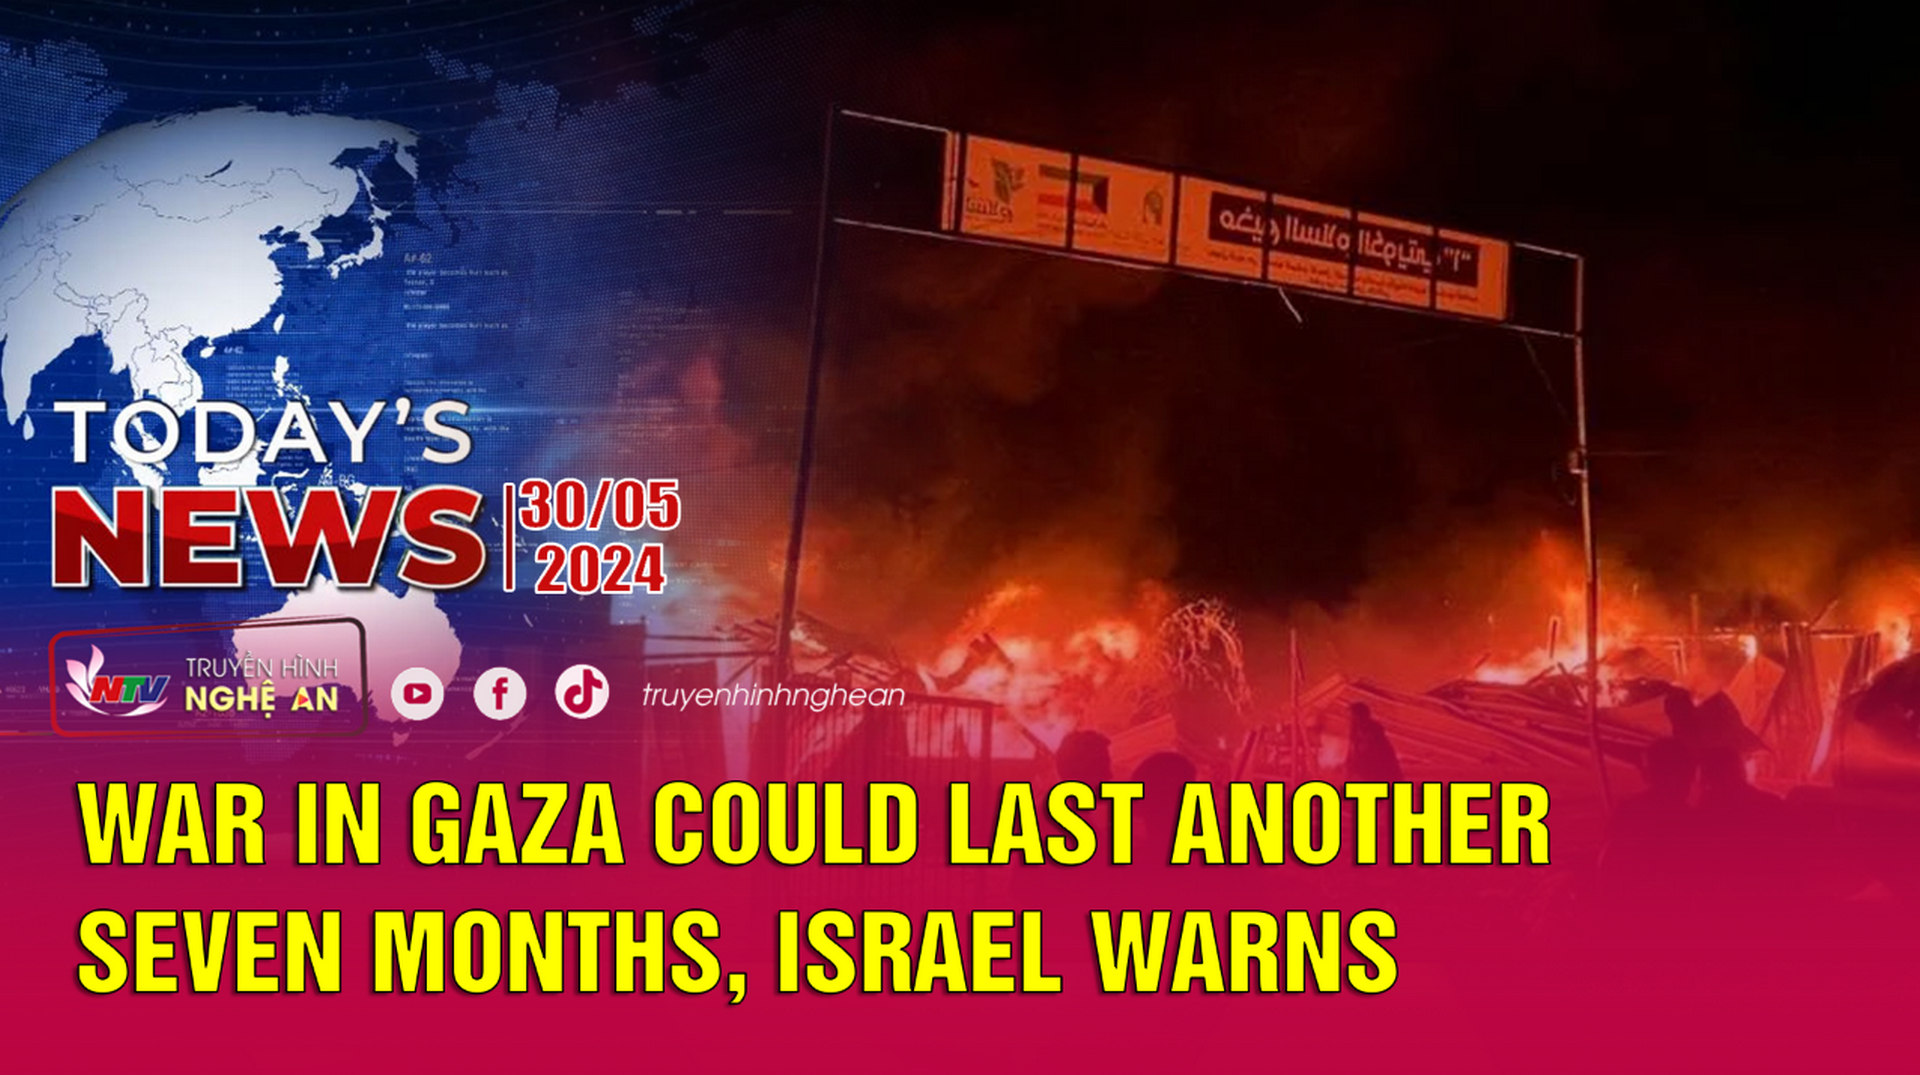 Today's News 30/05/2024: War in Gaza could last another seven months, Israel warns